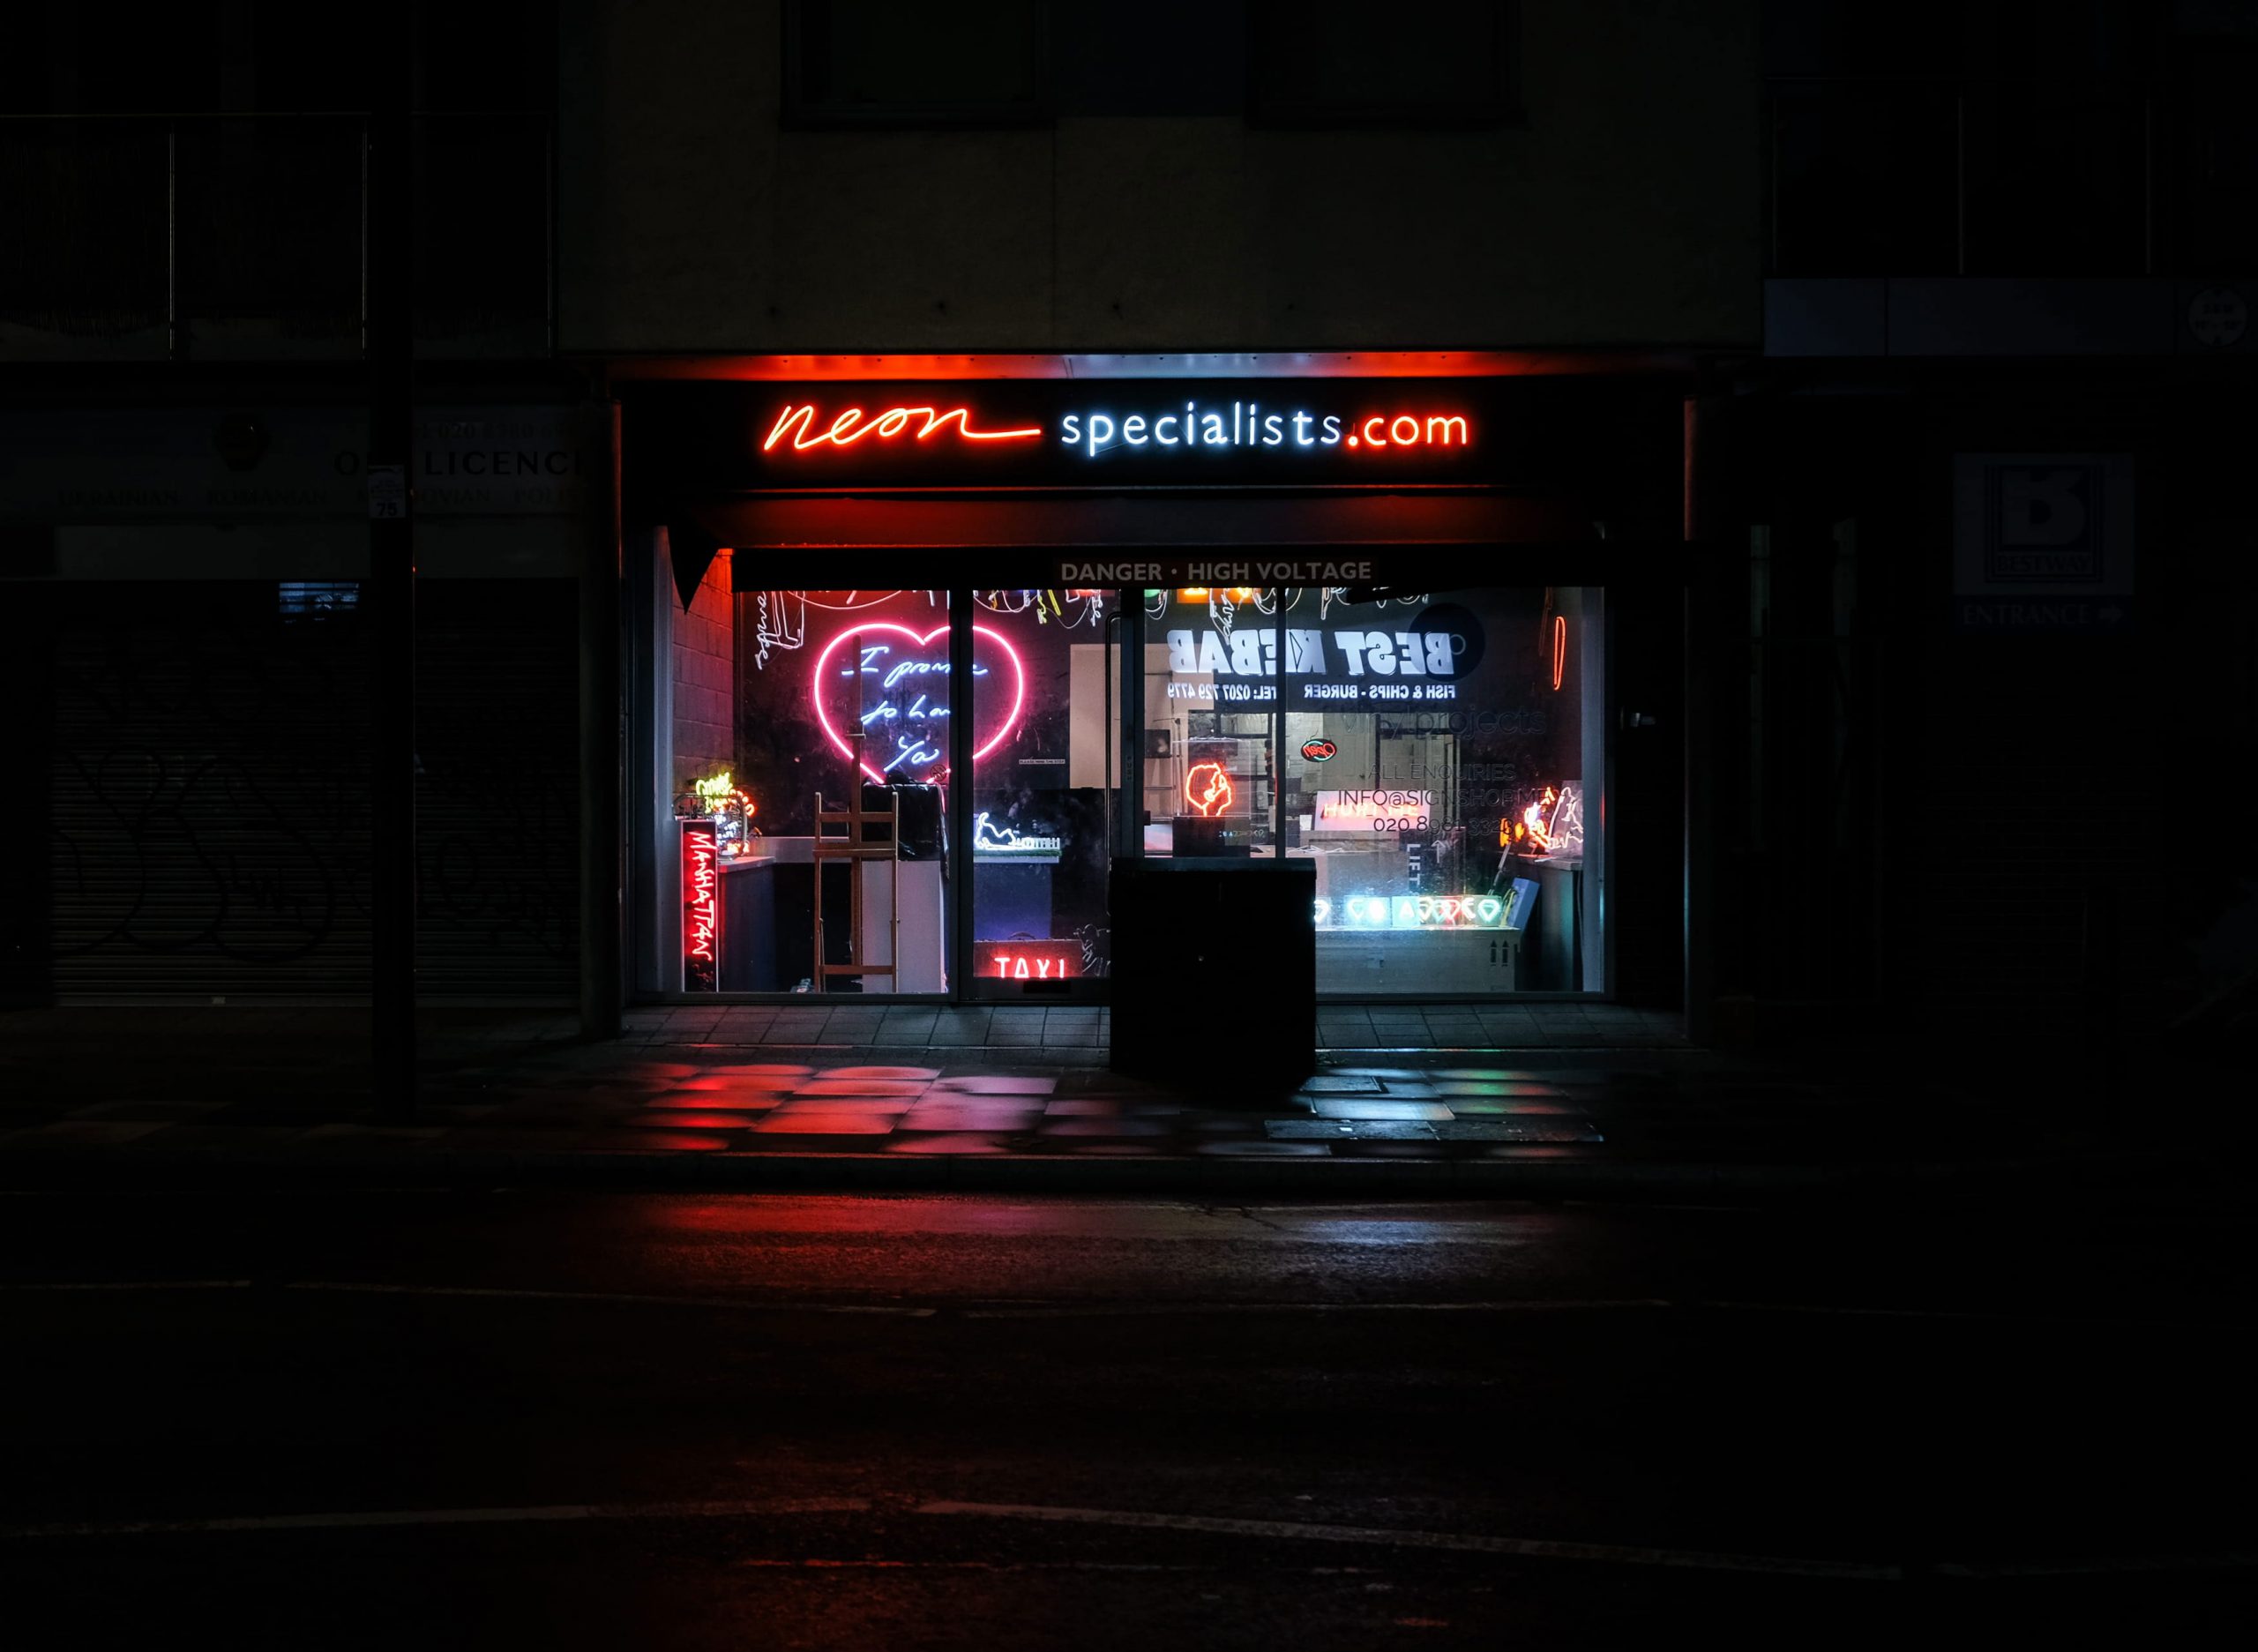 Wallpaper Neon Specialist. Com Store Front During Night